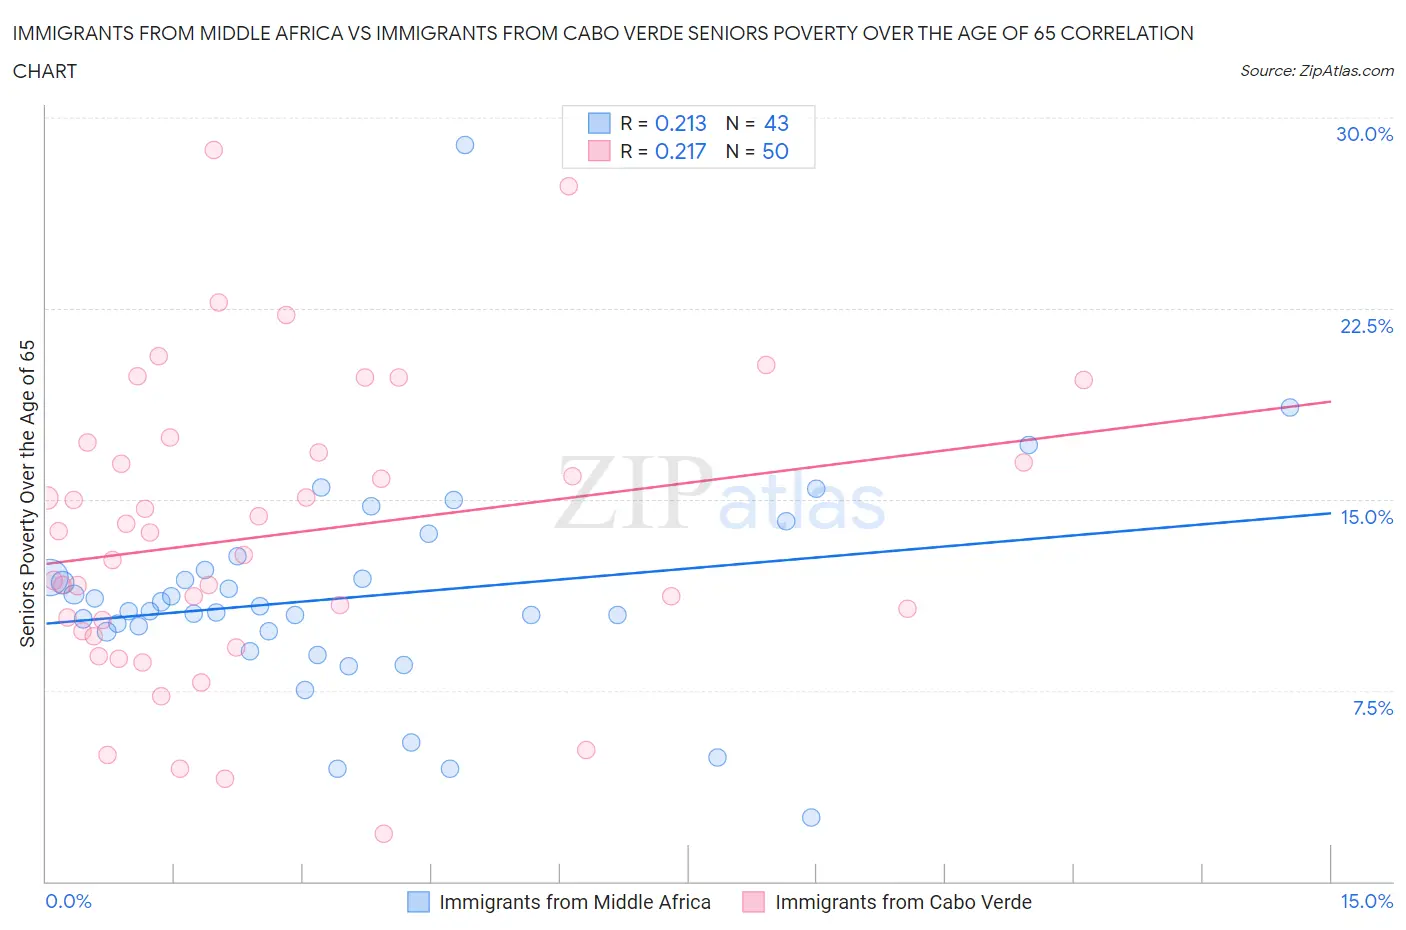 Immigrants from Middle Africa vs Immigrants from Cabo Verde Seniors Poverty Over the Age of 65